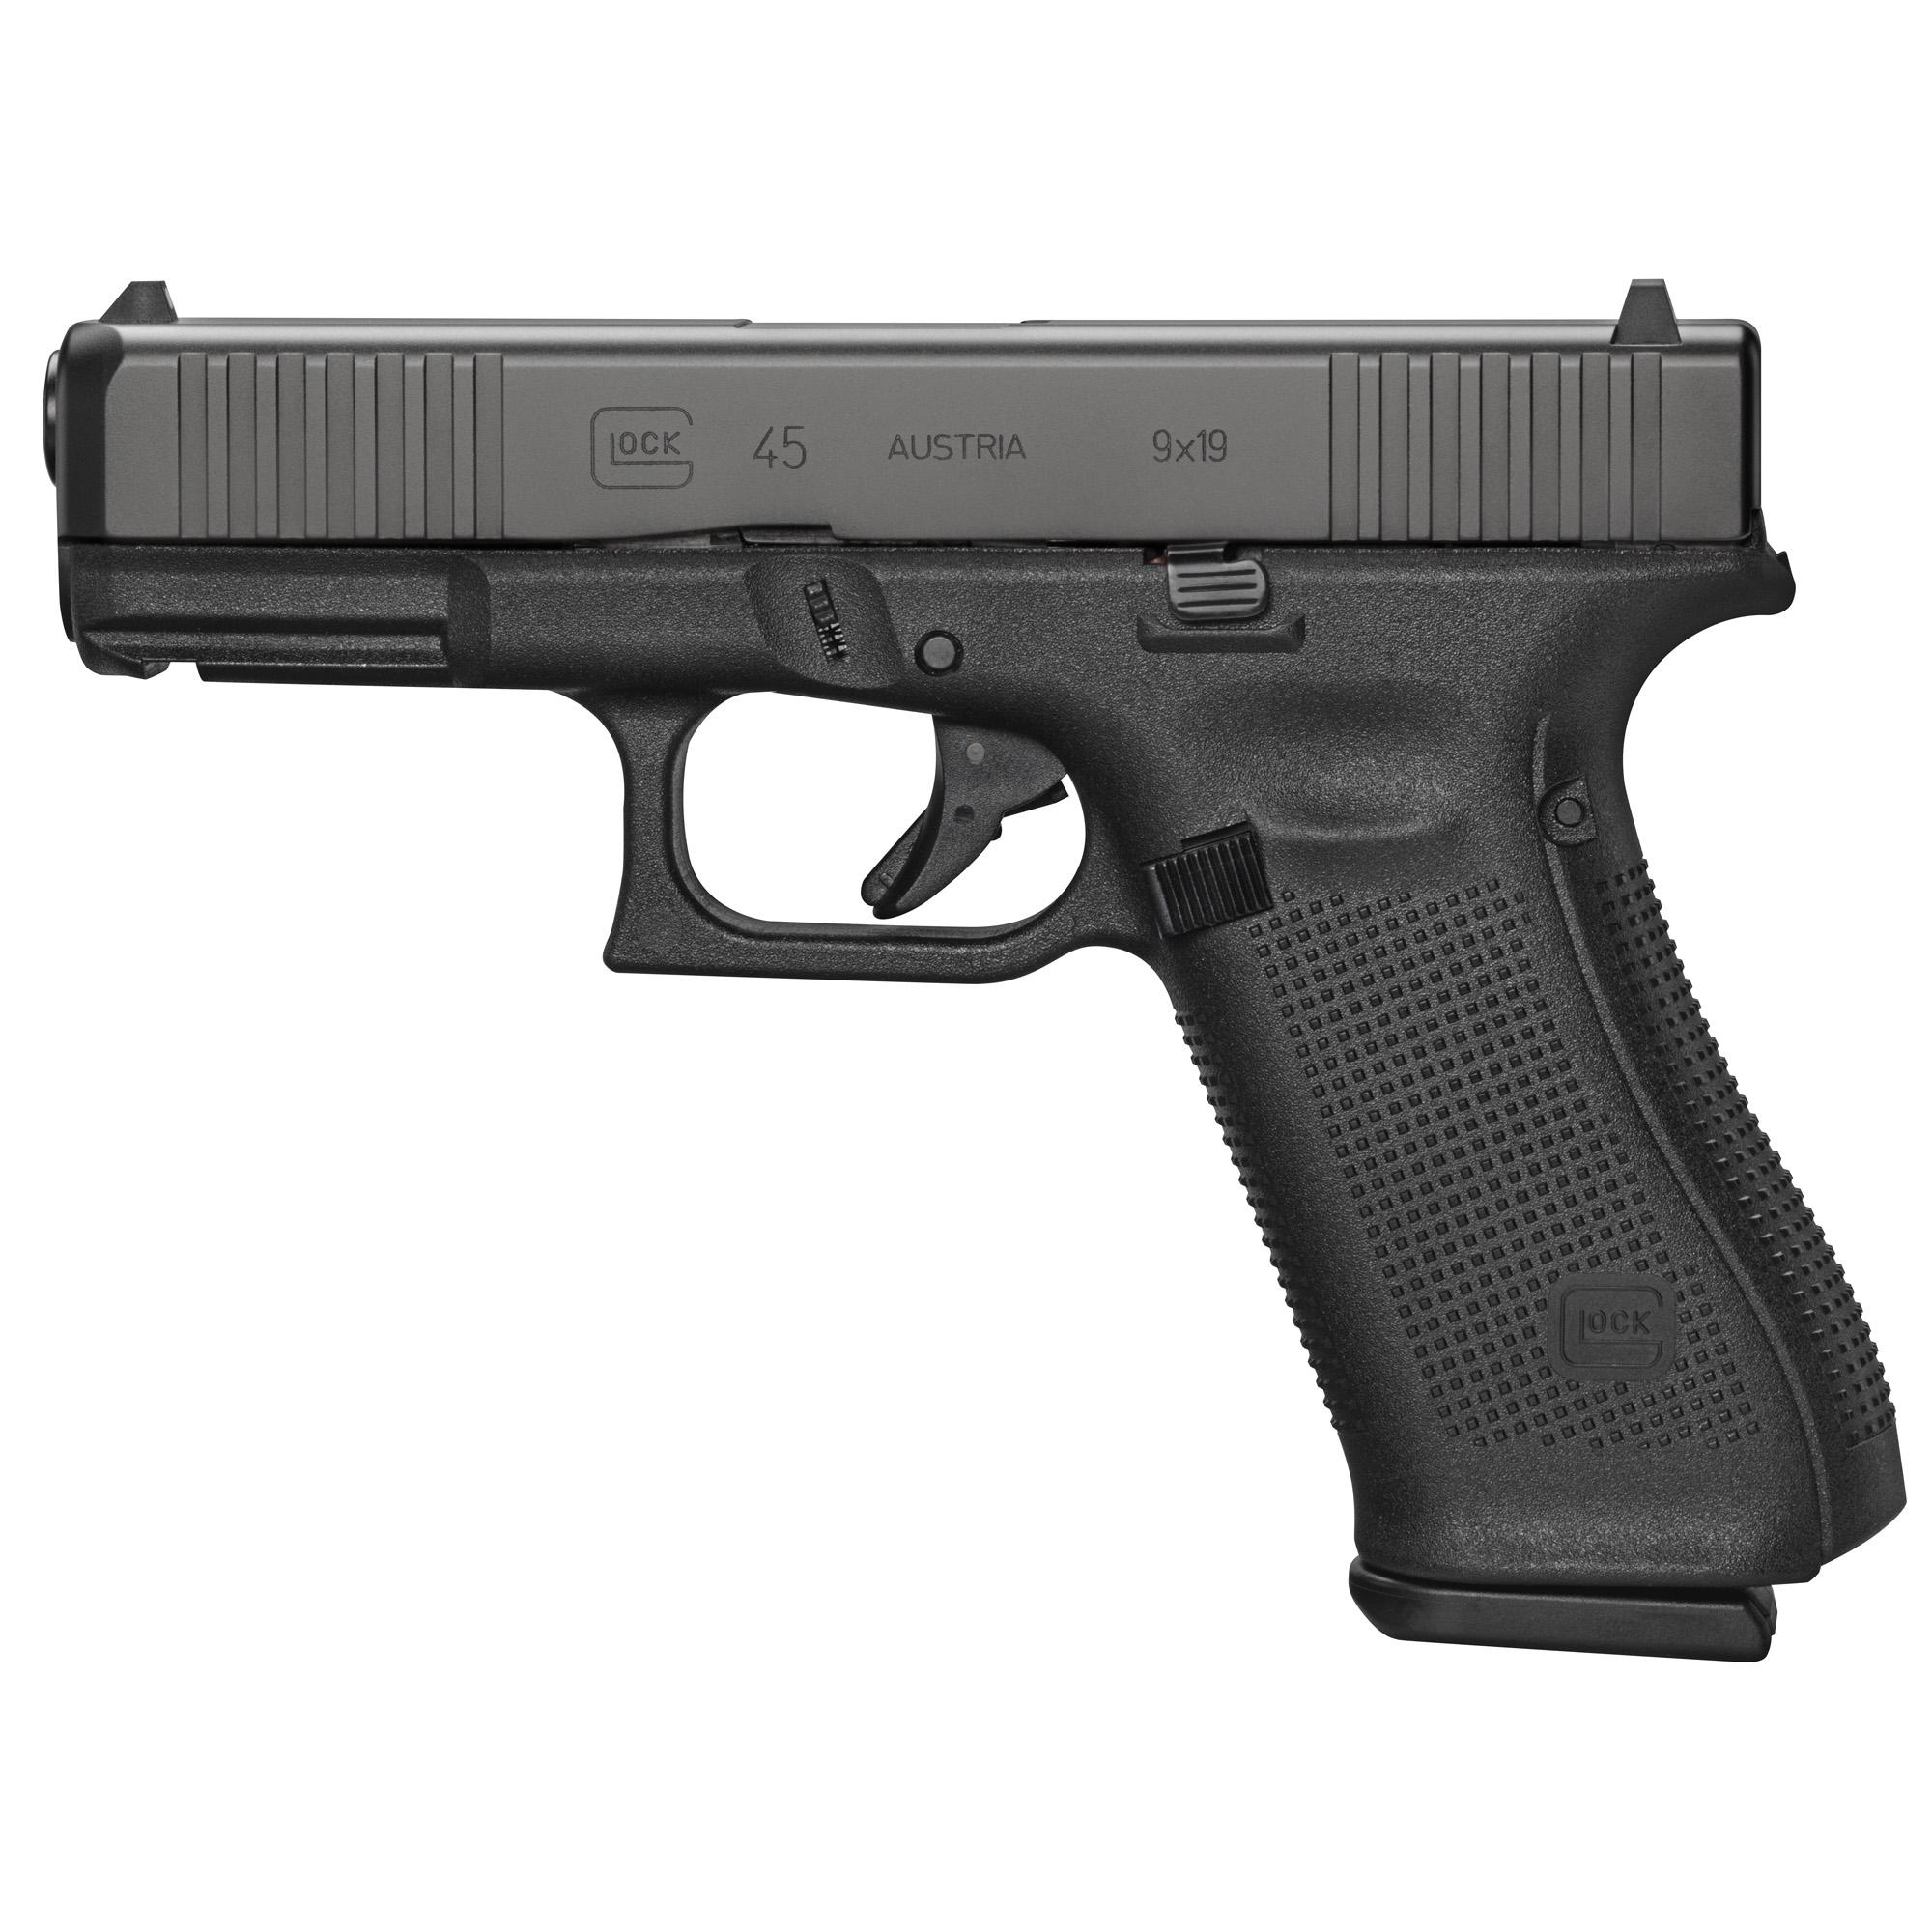 Glock G45 Gen5 Compact Crossover 9mm Pistol 4.02" Barrel, 17+1 Rounds, Polymer Grips, 3-Dot Sights (PA455S203) 76450